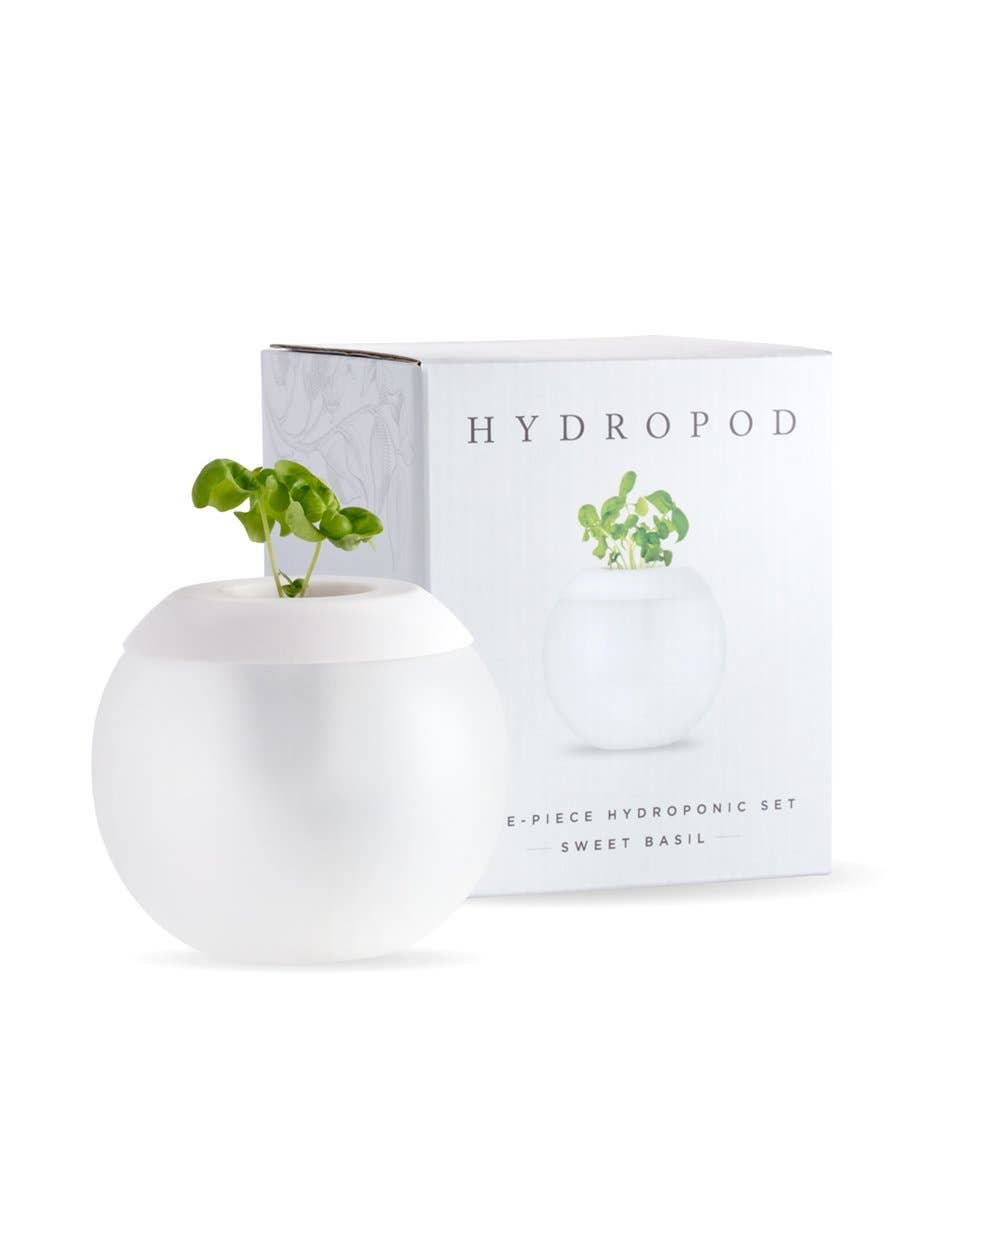 The Hydropod Plant Grower - Free Living Co